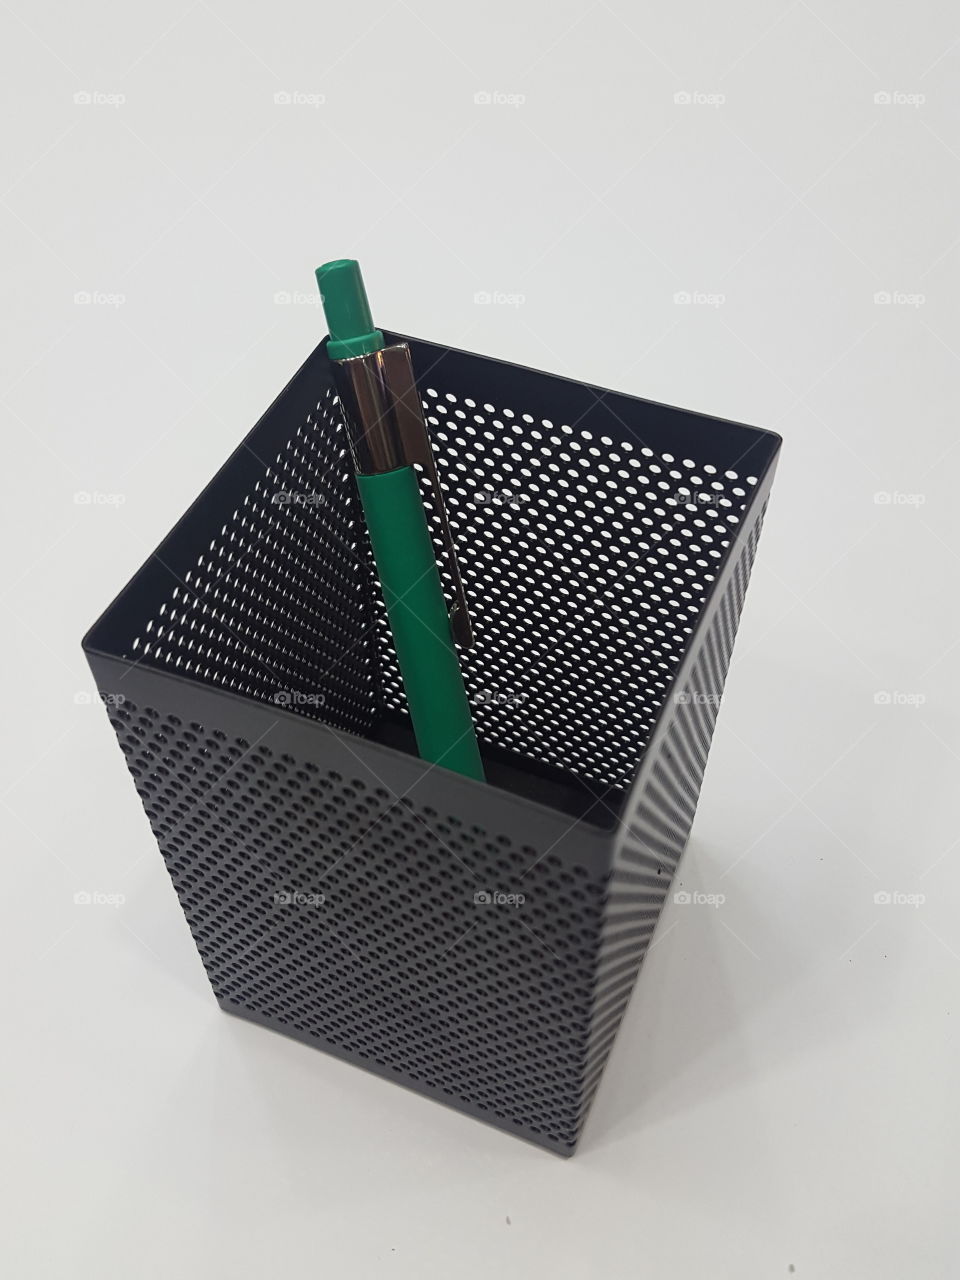 Black Perforated metal pen stand with green plastic body pen